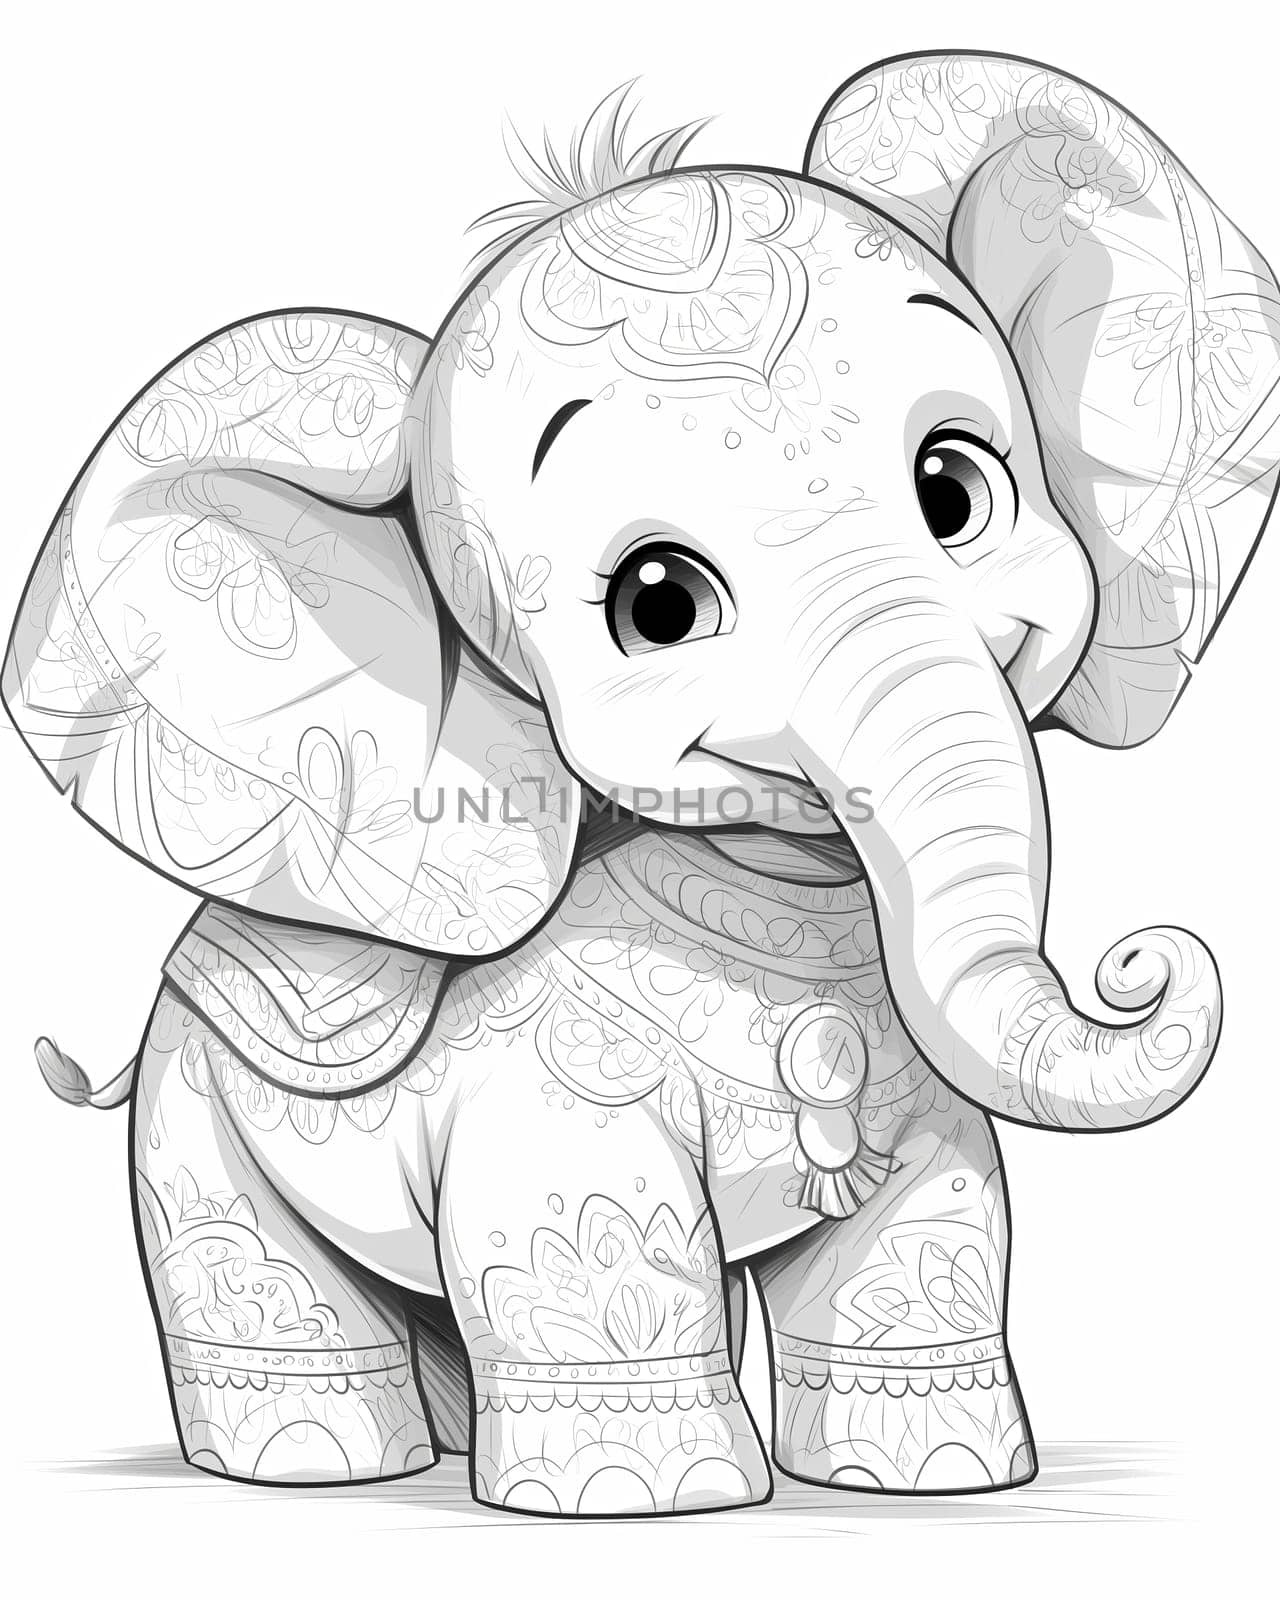 Coloring book for kids, animal coloring, elephant. by Fischeron